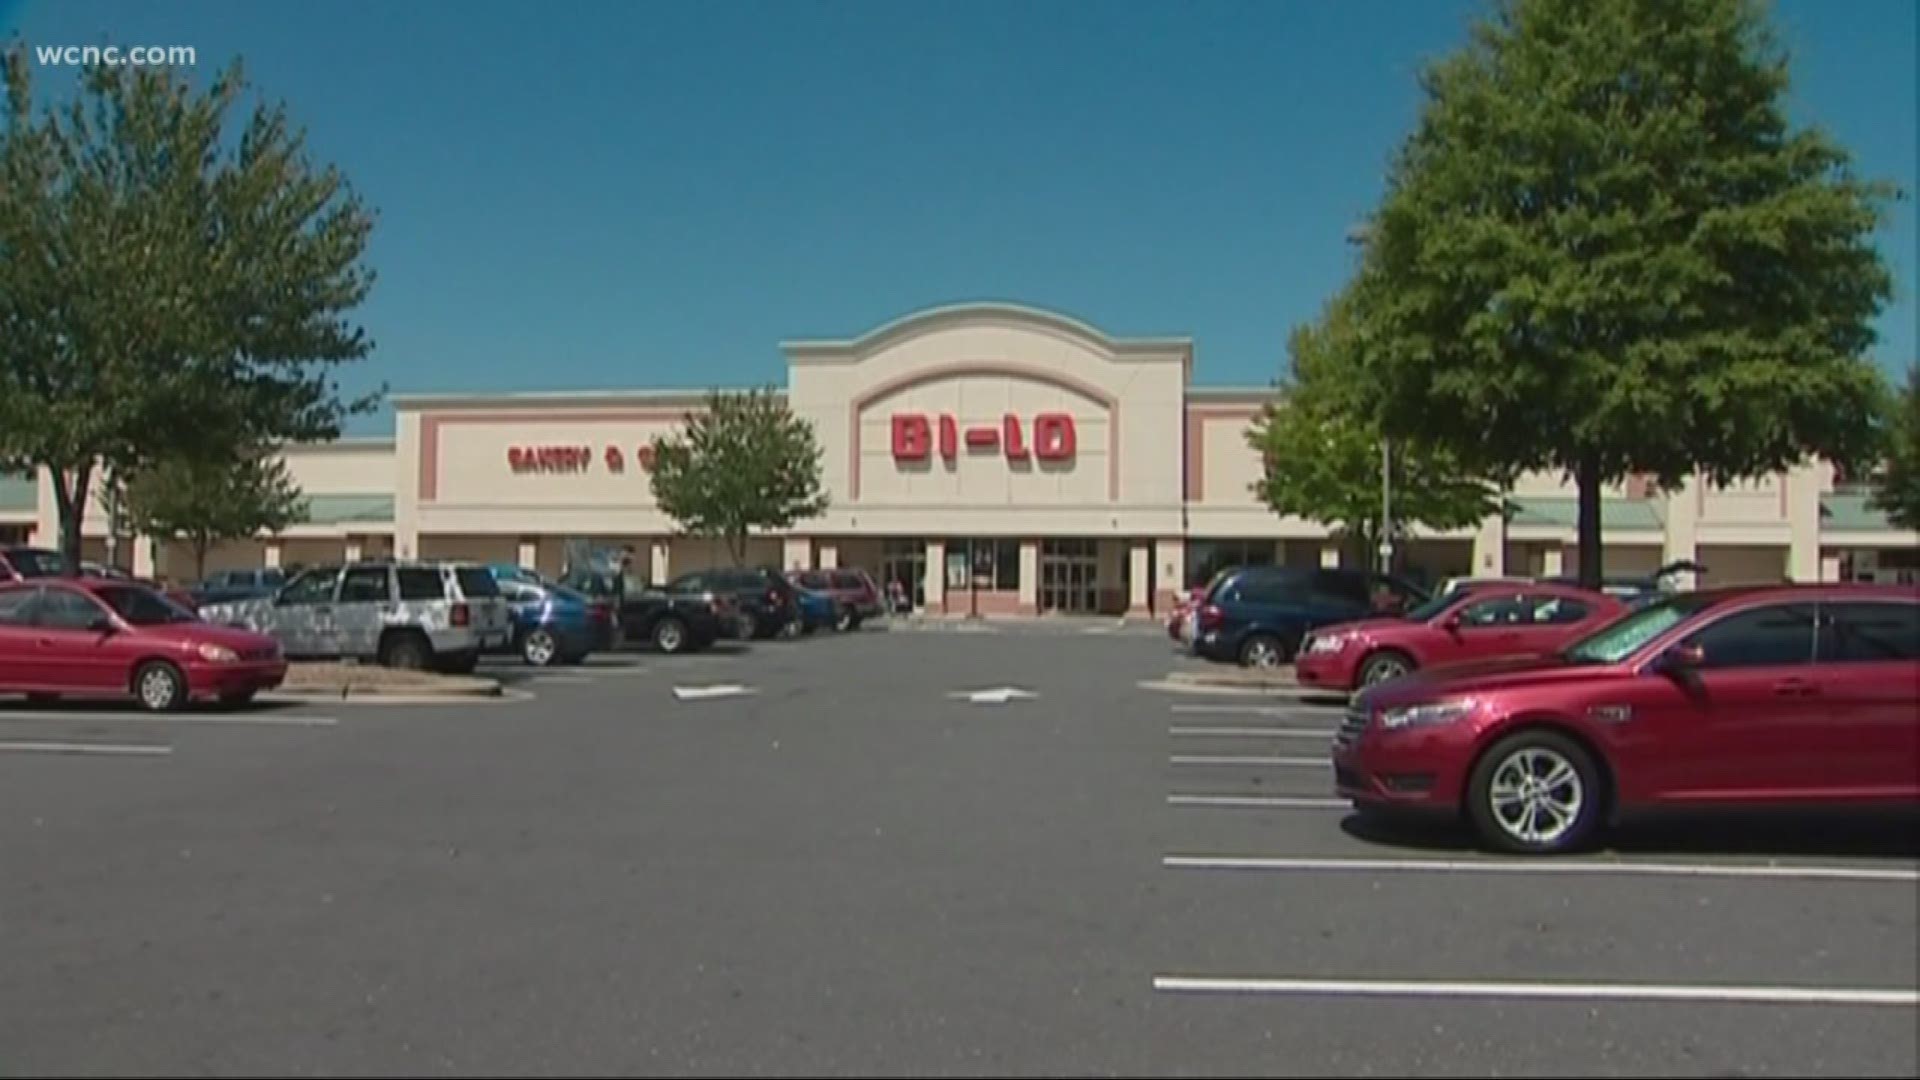 Southeastern-based Bi-Lo announced that its closing two more stores in the Charlotte area after filing for bankruptcy last year.